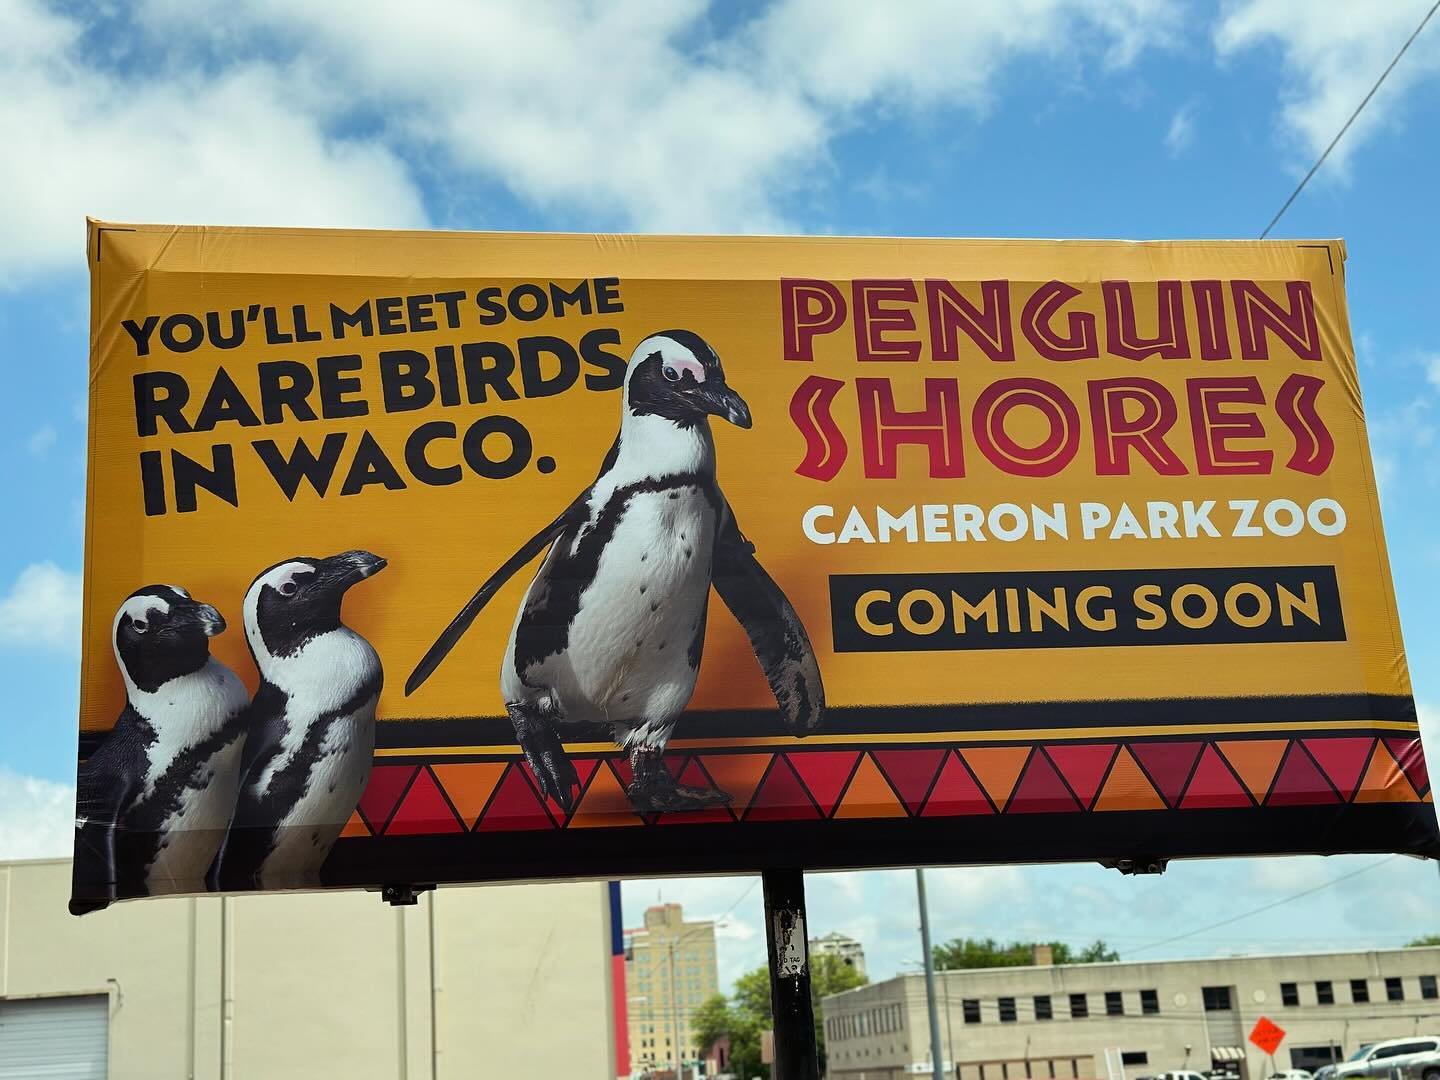 Cameron Park Zoo penguin billboards are up! We love seeing this marketing campaign out and about on billboards, social media, signage and ads! #wacomarketing